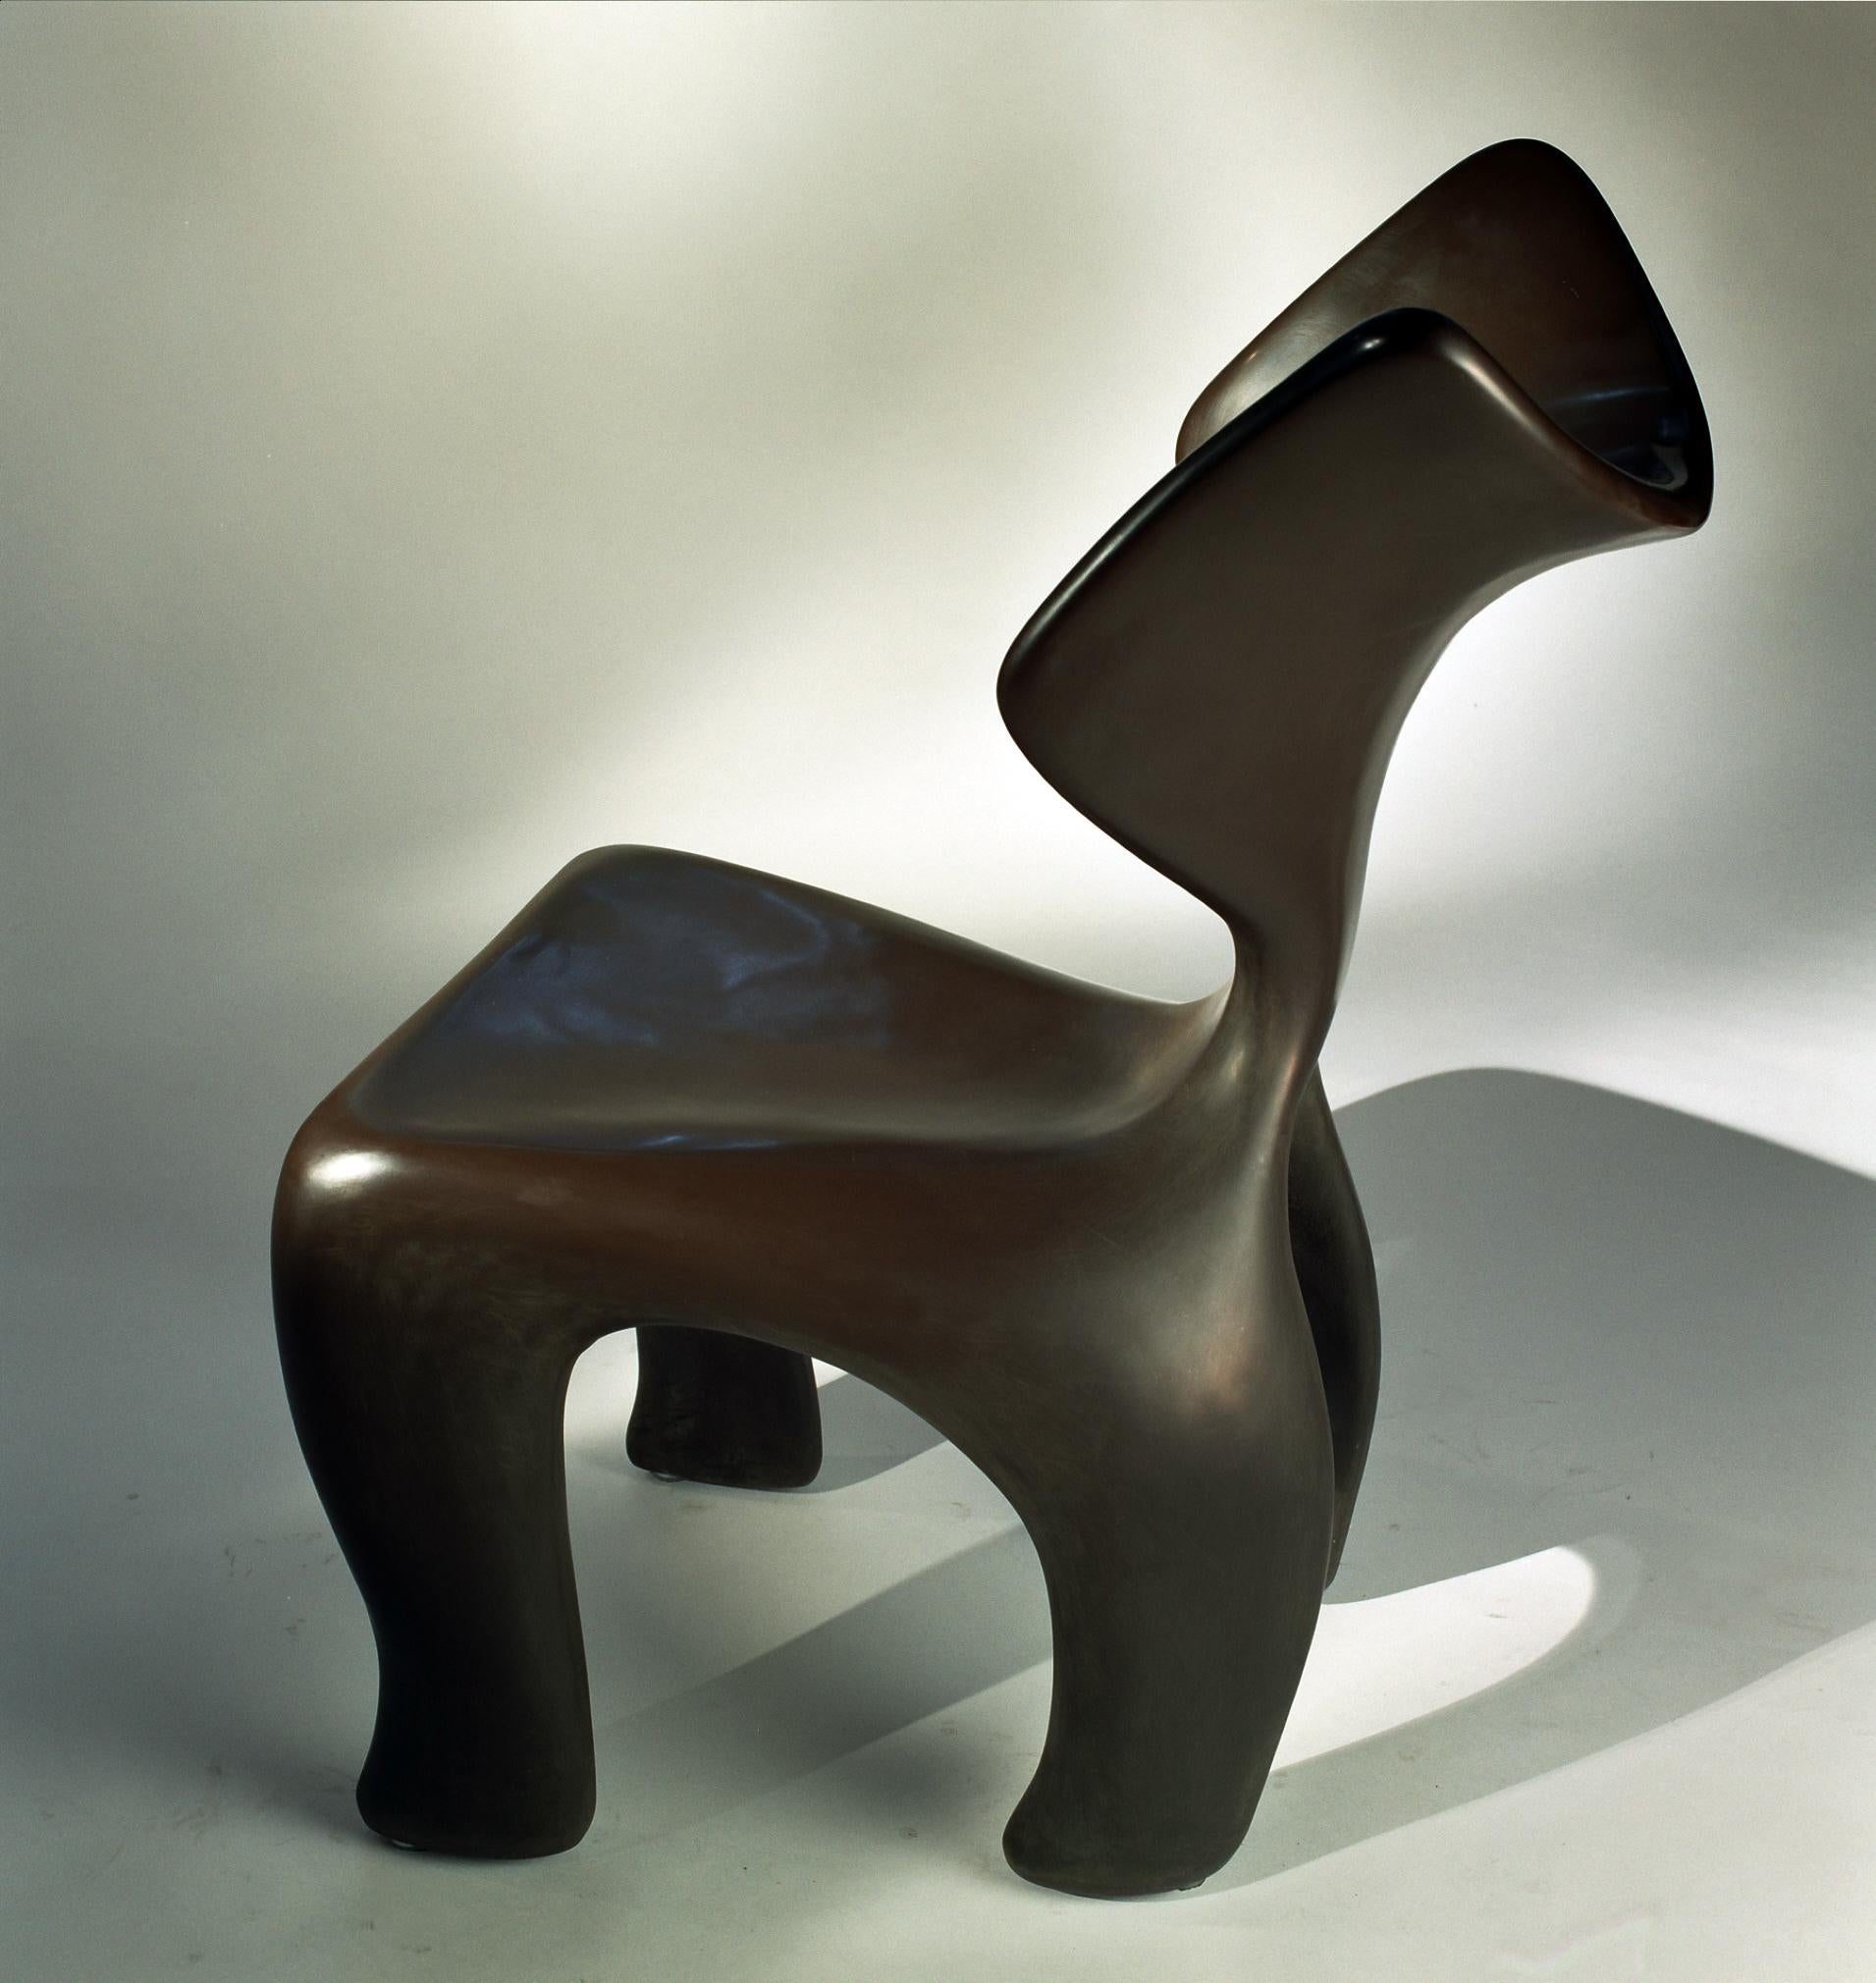 Modern East Lounge Chair, Integrally Colored Chocolate Resin, Jordan Mozer, USA, 2004 For Sale